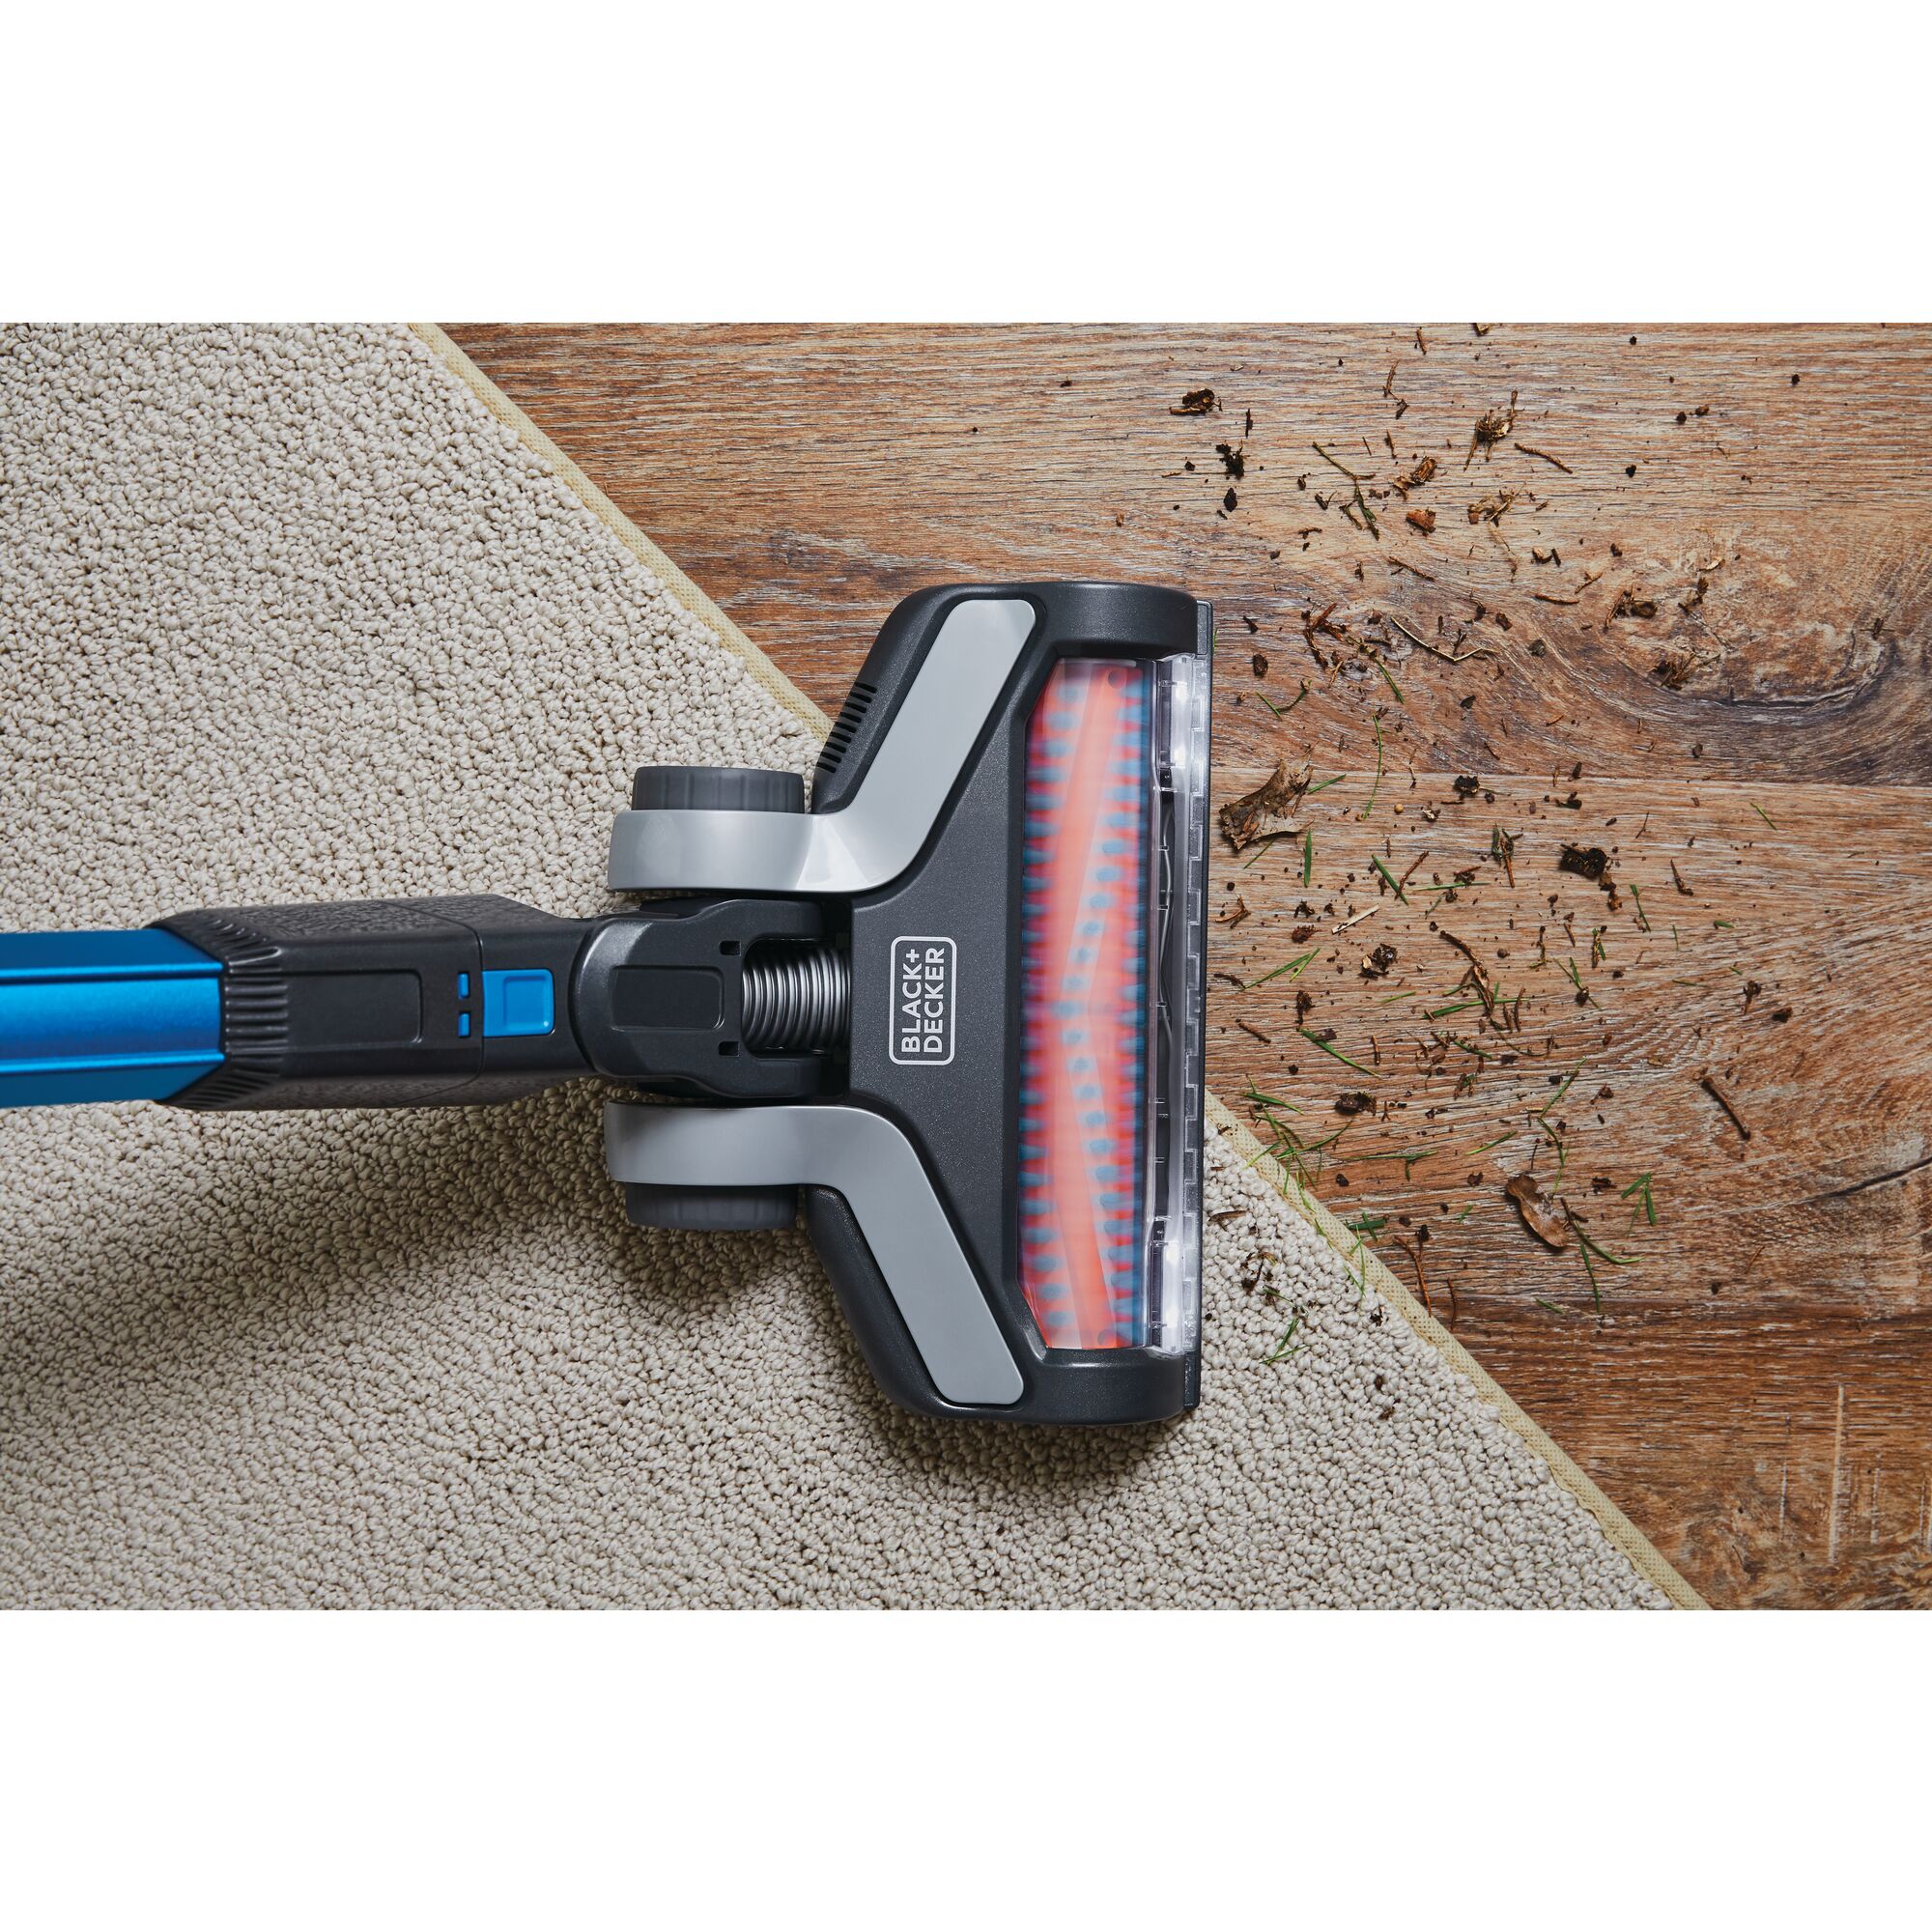 Powerseries extreme cordless stick vacuum cleaner being used to clean floor.